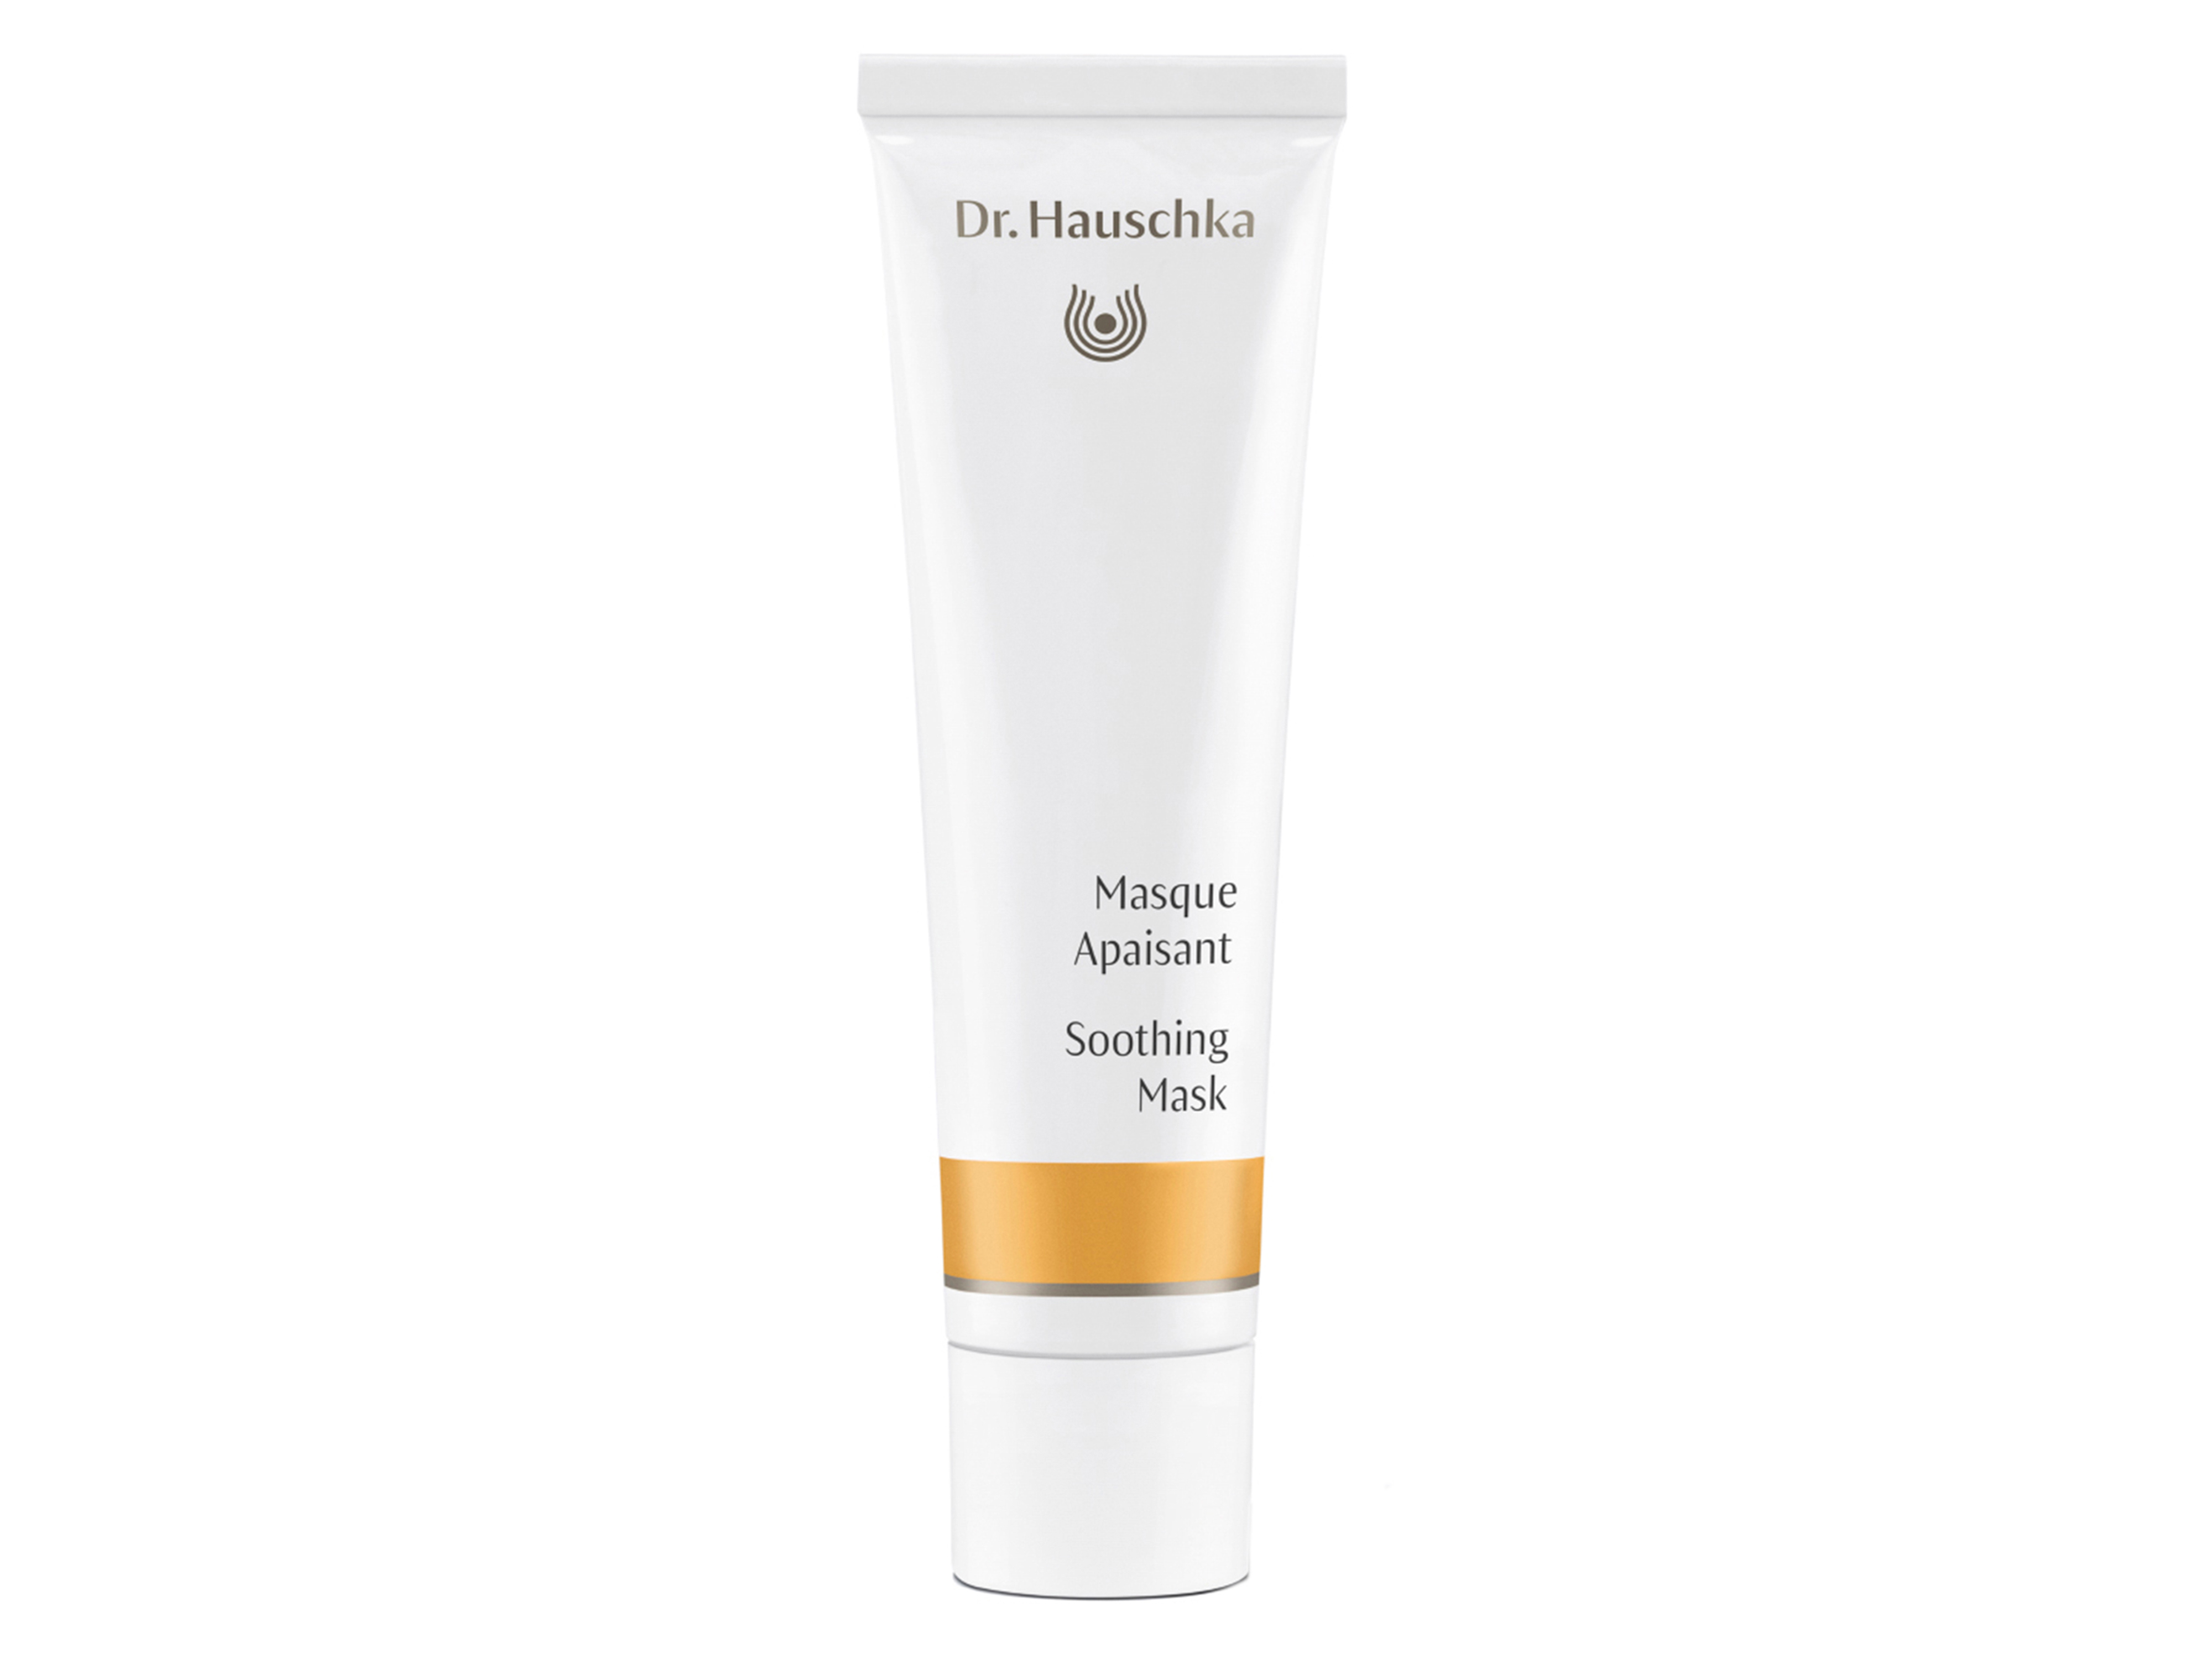 Dr. Hauschka Soothing Mask, 30 ml